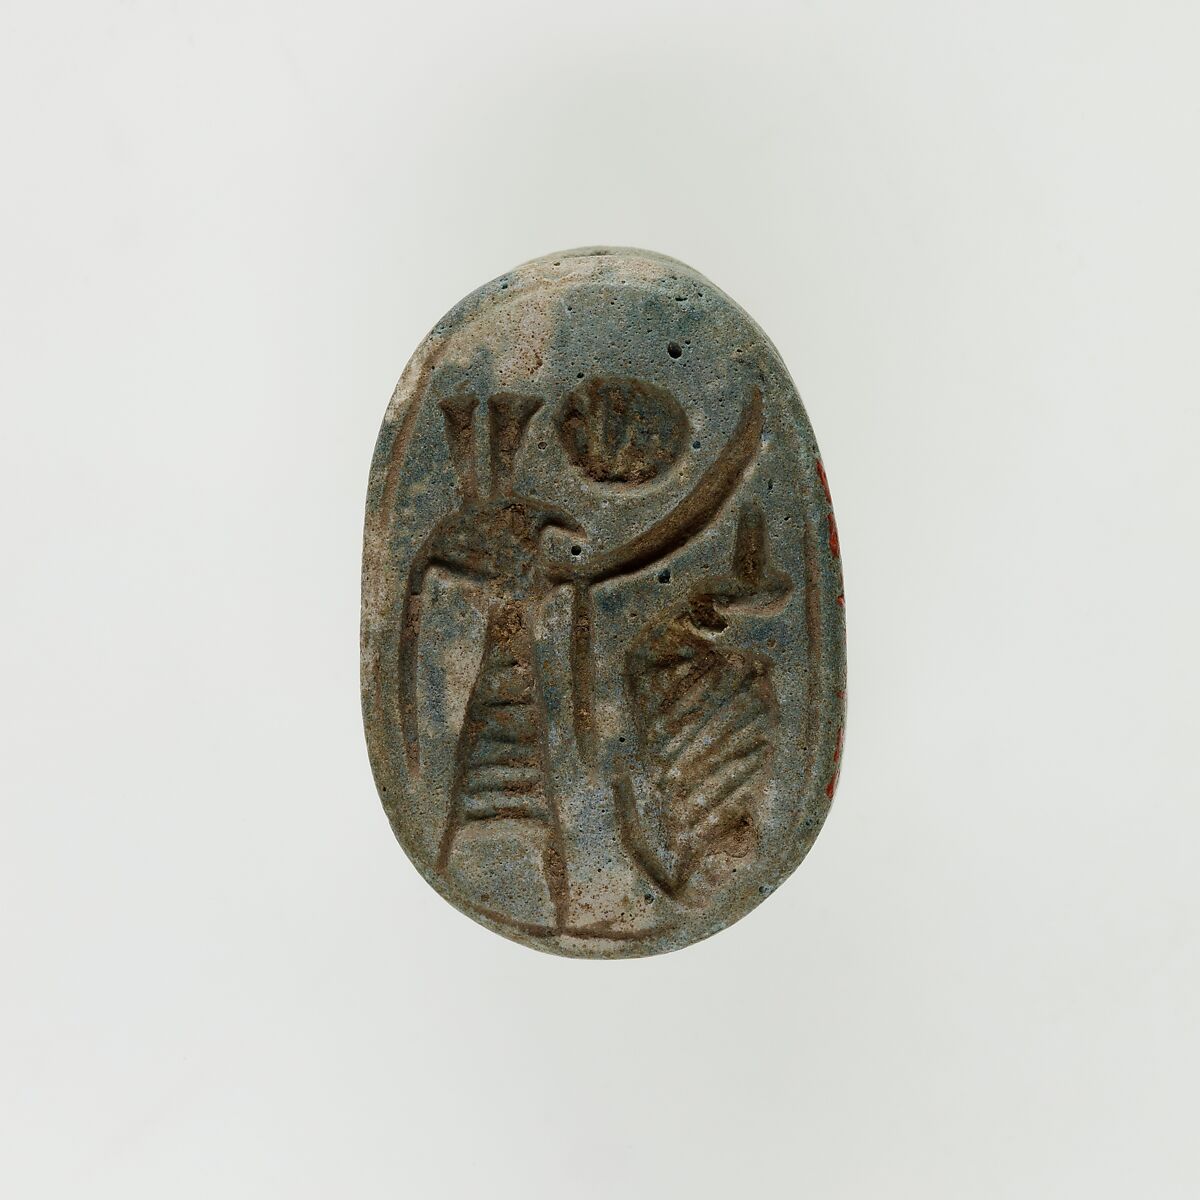 Scarab with a Representation of Seth-Baal and Uraeus, Light green faience 